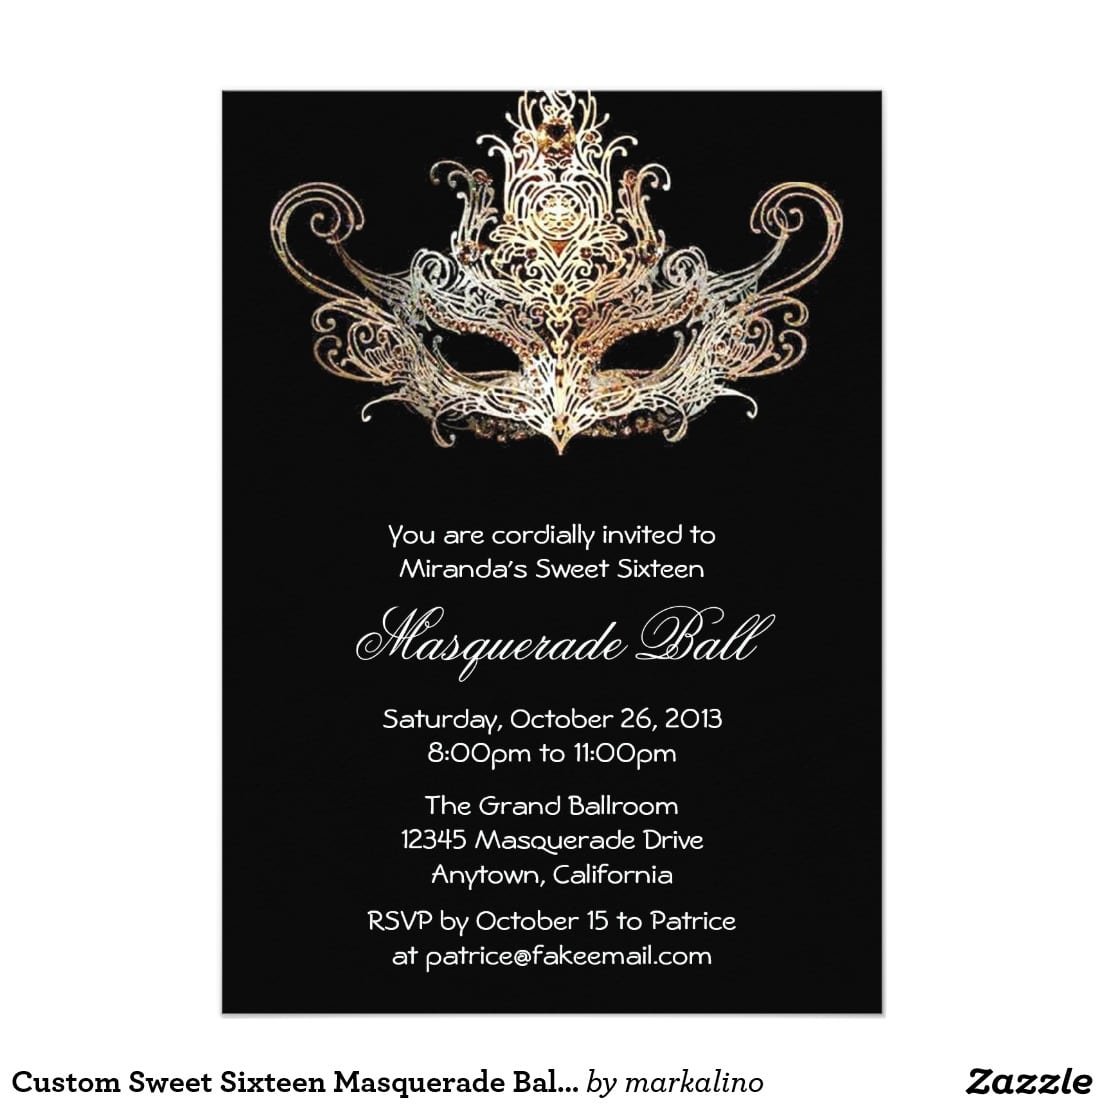 17 Best Images About Masquerade Ball On Pinterest